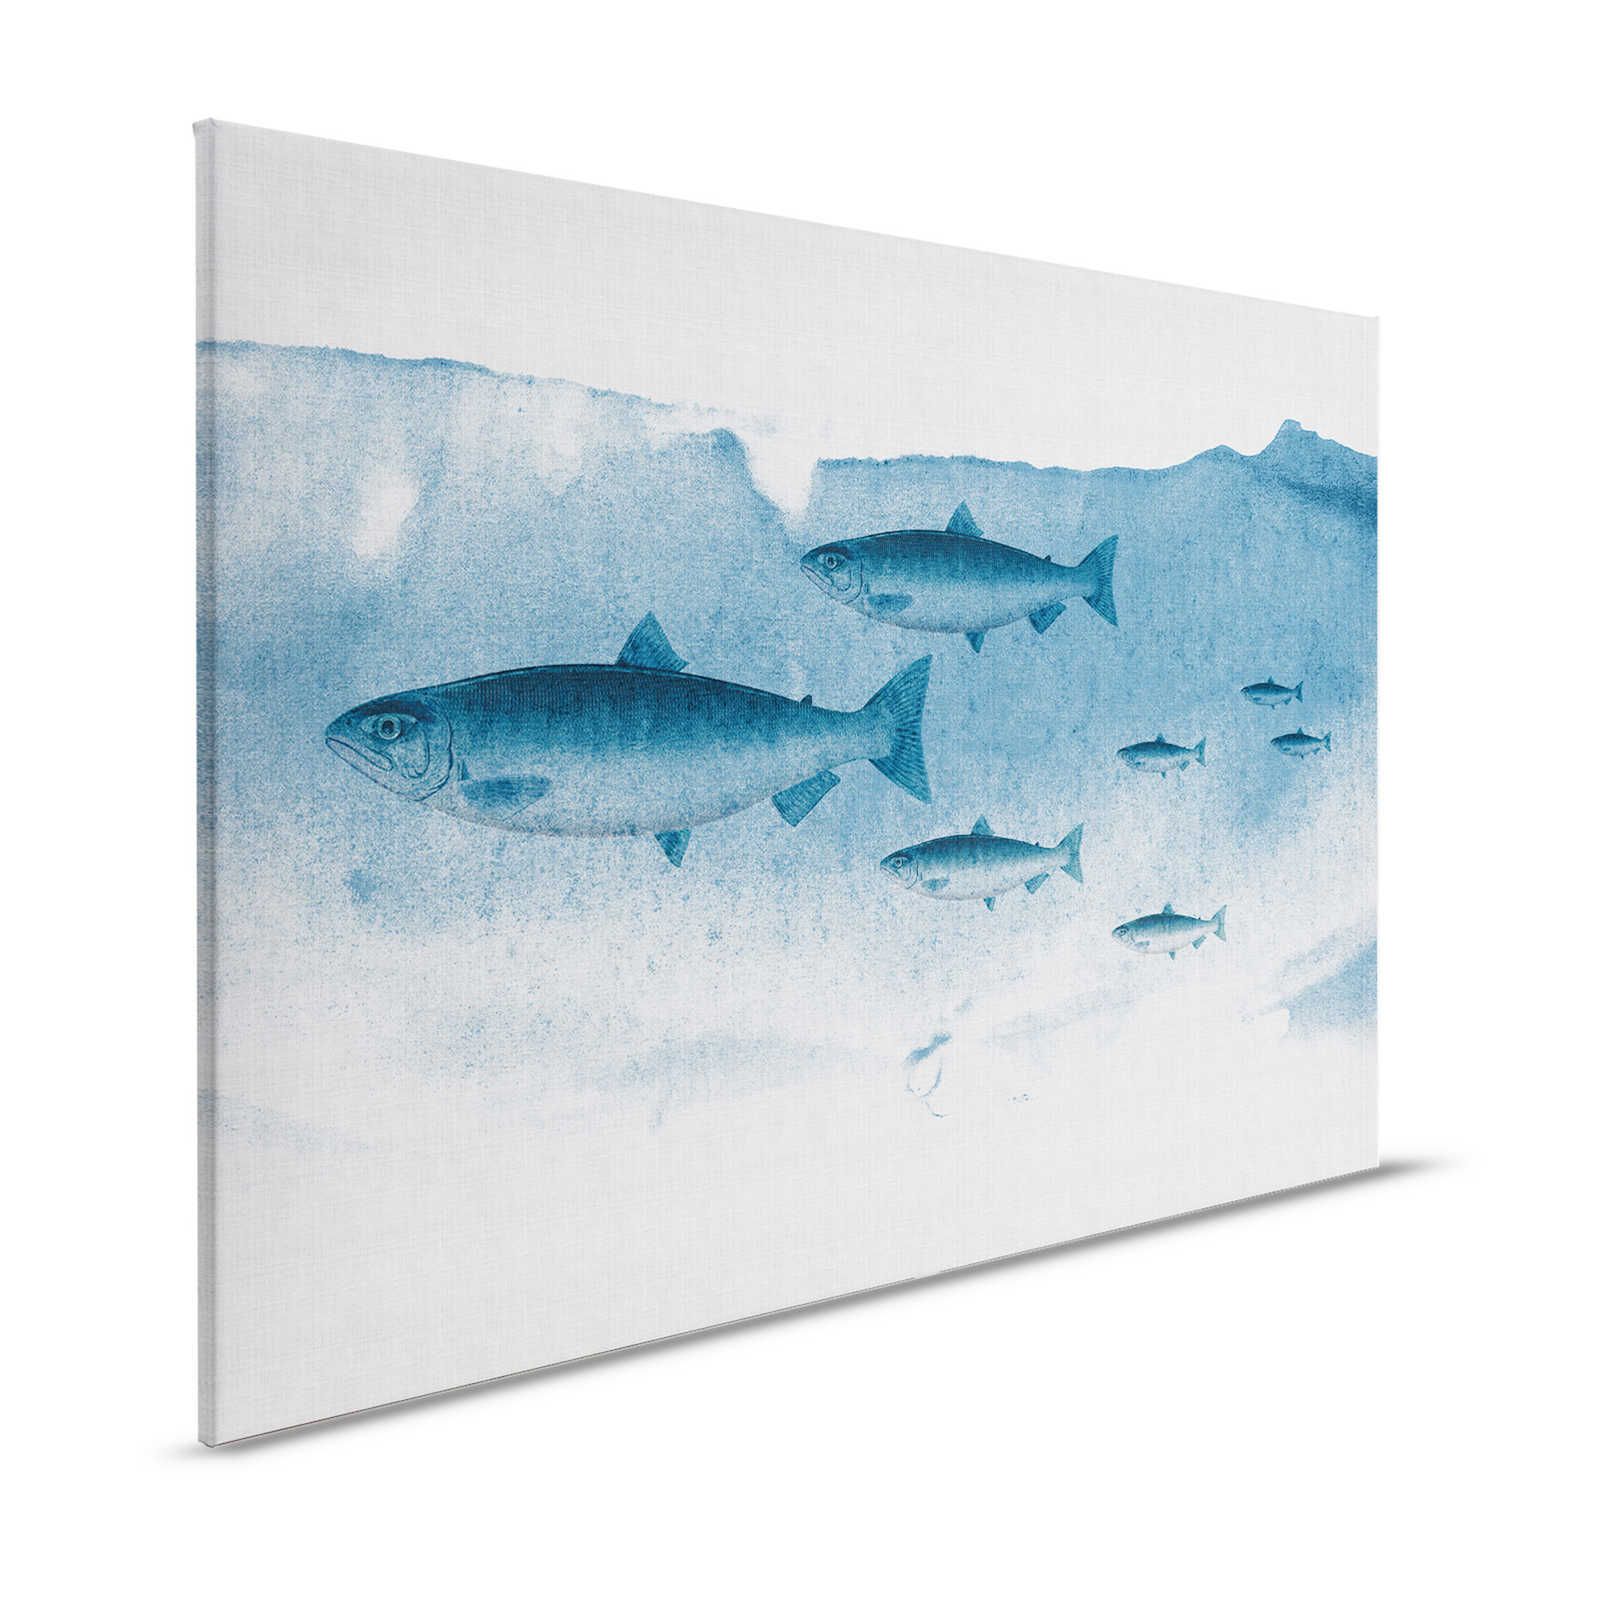 Into the blue 1 - Fish watercolour in blue as a canvas picture in natural linen look - 1.20 m x 0.80 m
